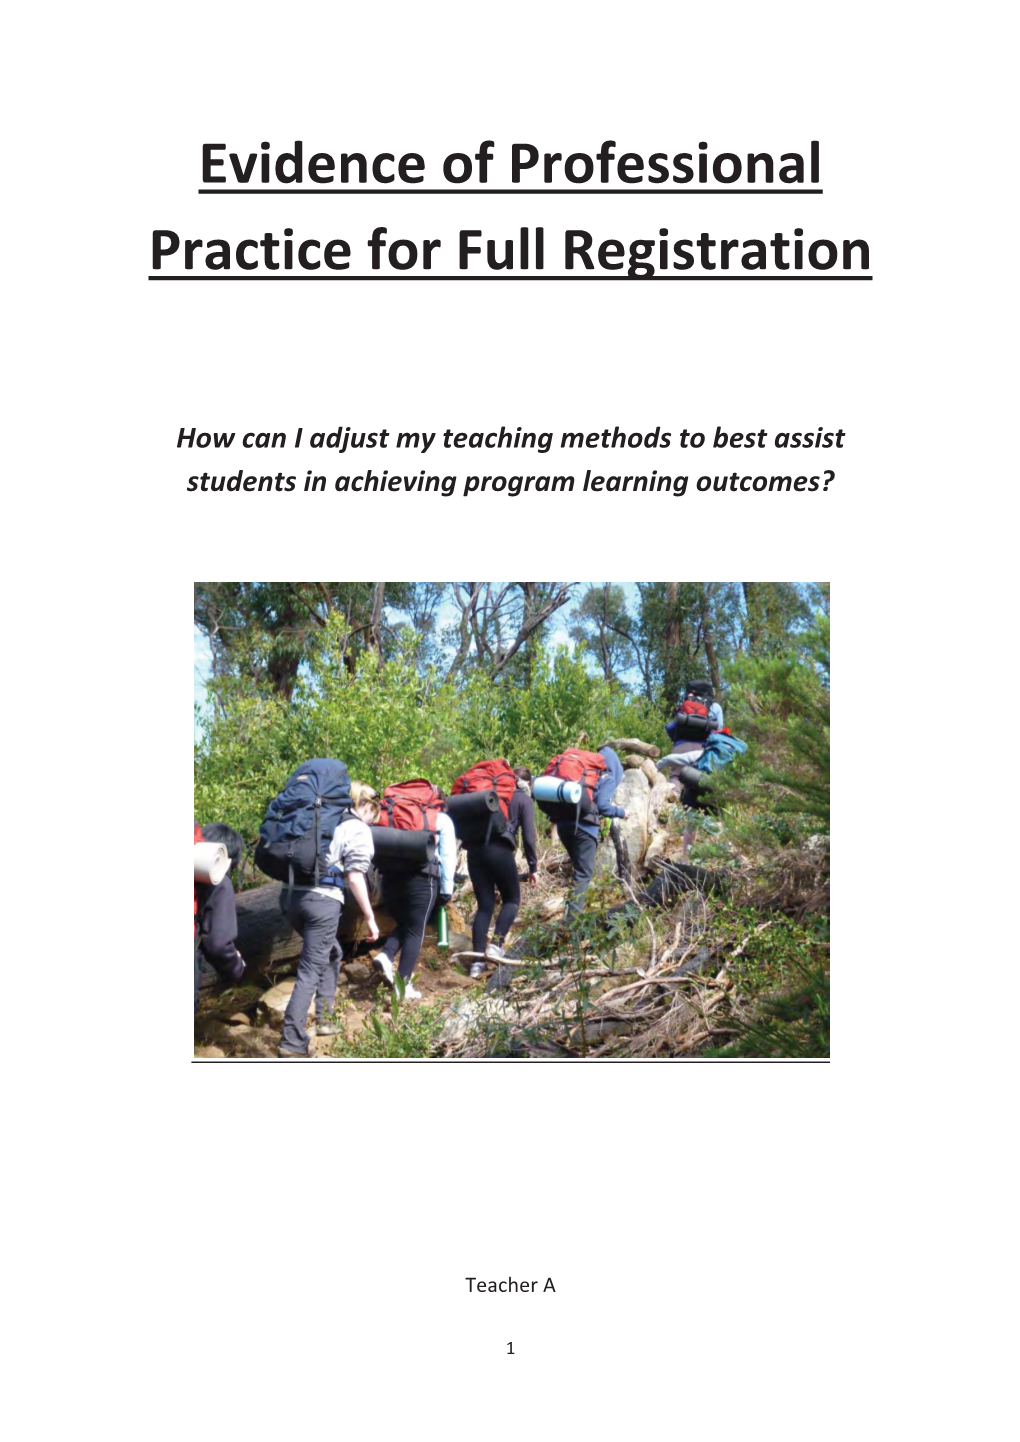 Evidence of Professional Practice for Full Registration